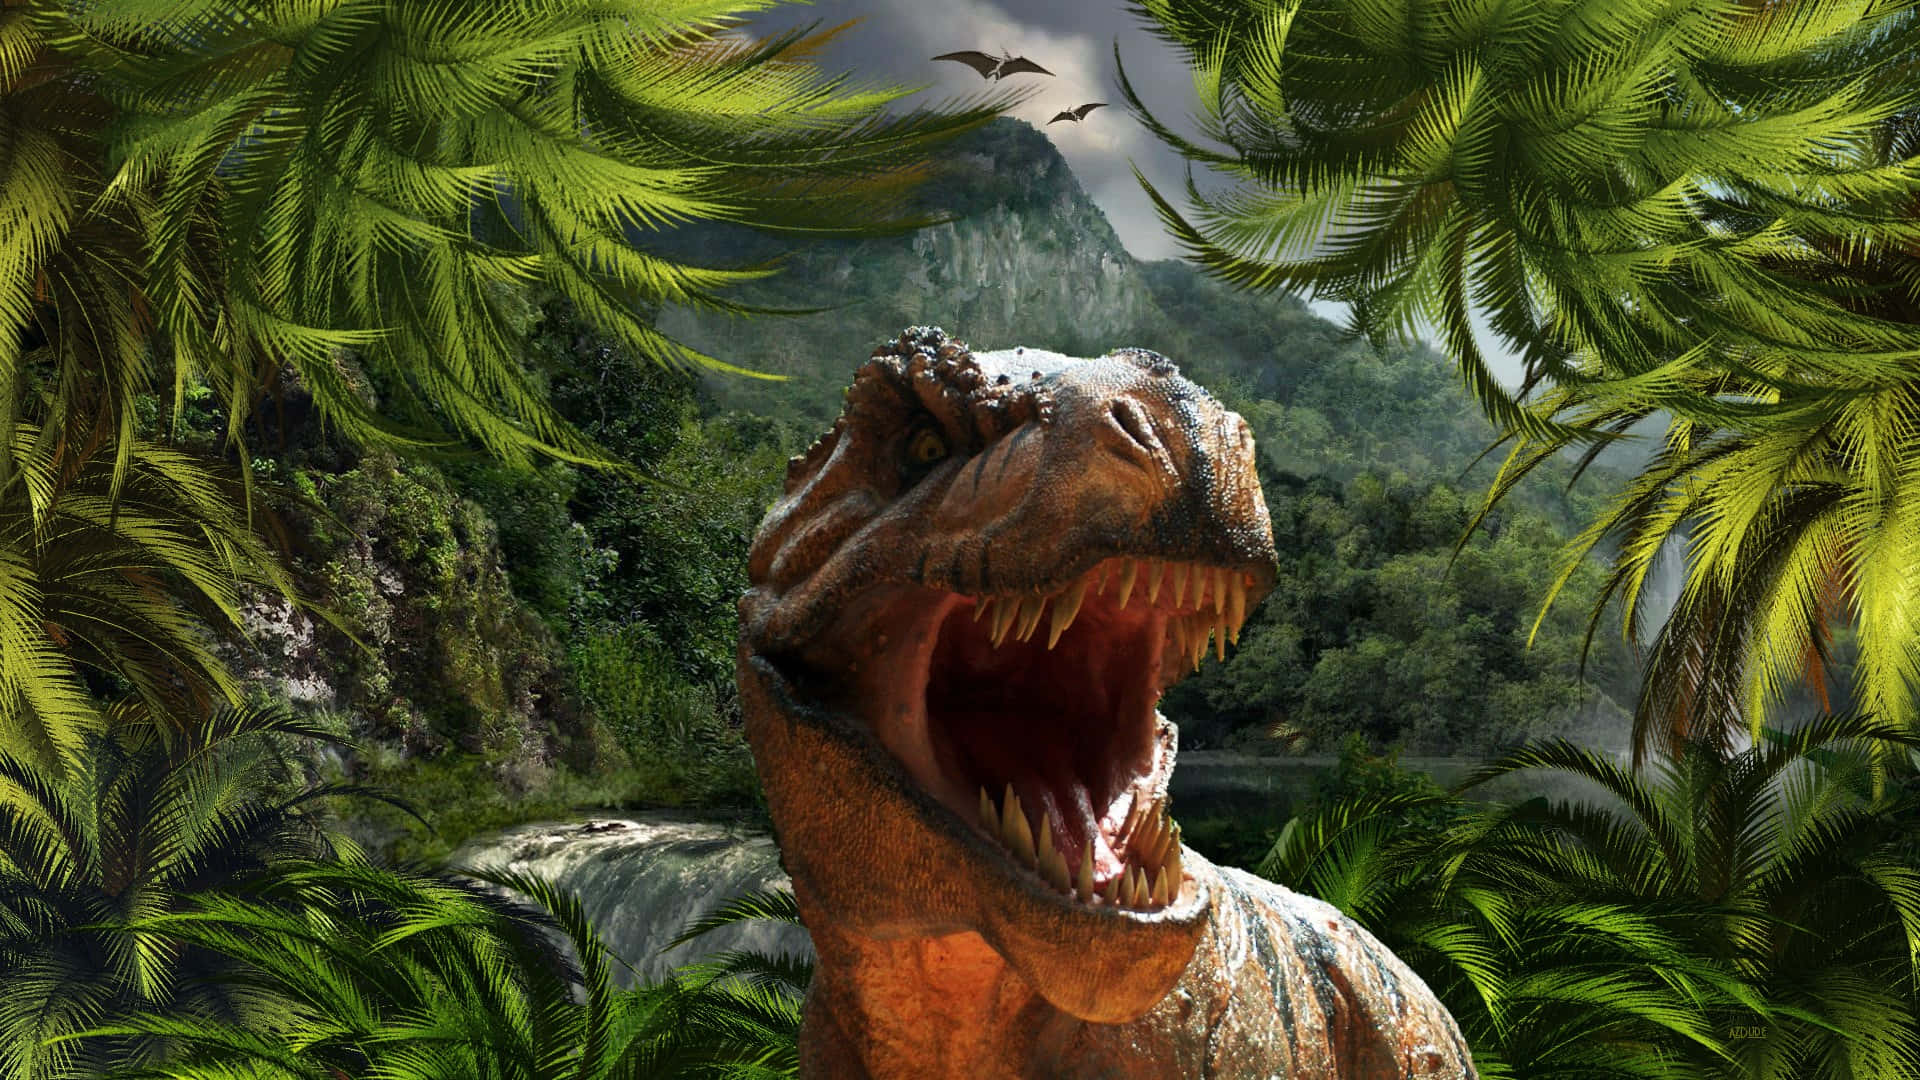 Escape the stress of day-to-day life with an adventure to Jurassic Park!